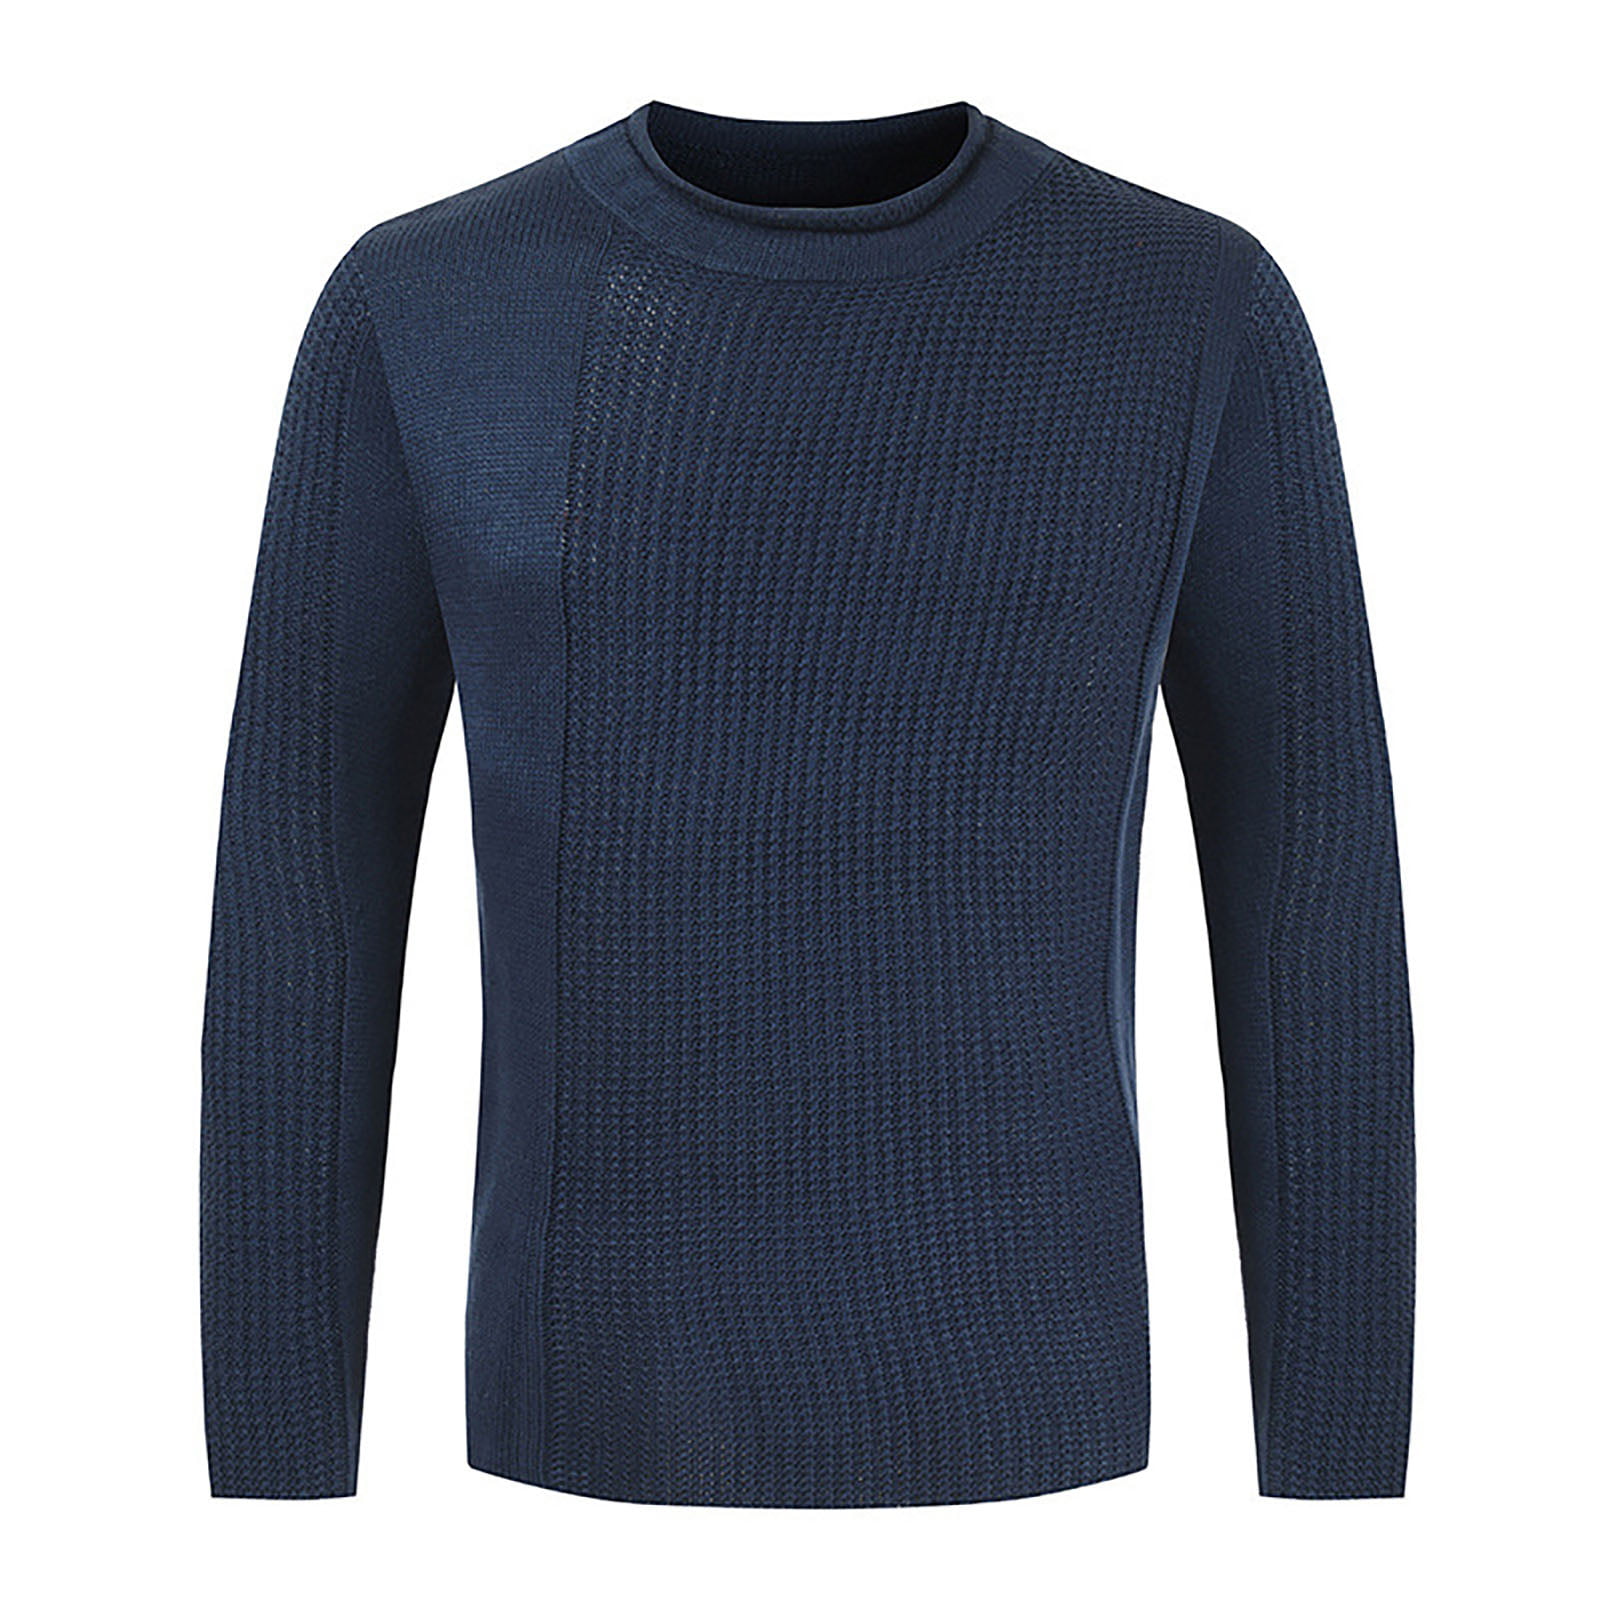 Firetrap Mens Textured Knit Jumper Sweater Pullover Crew Neck Long Sleeves Top